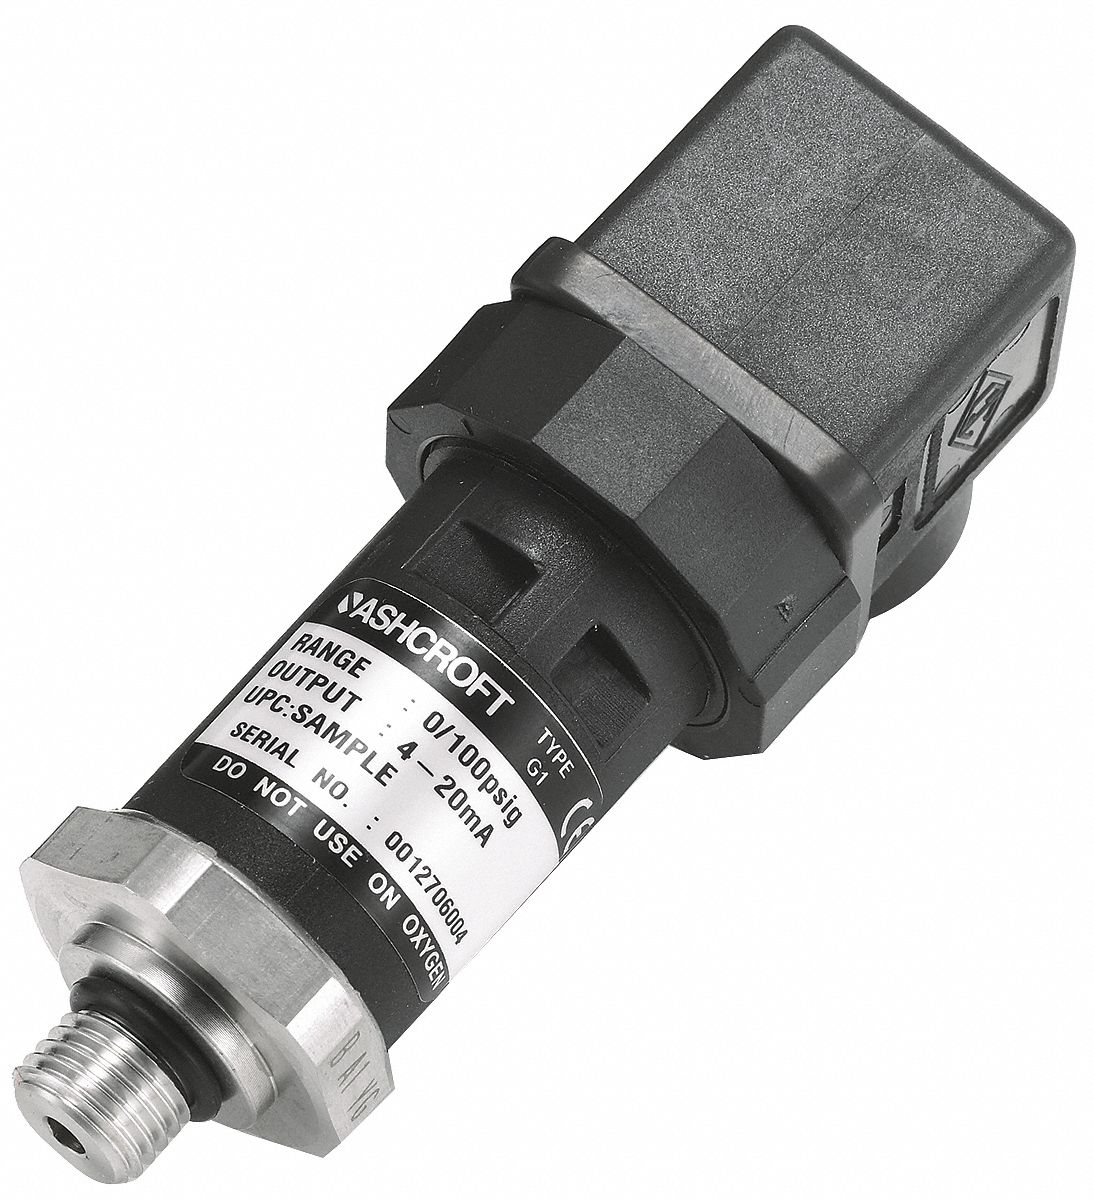 7/16-20 SAE Male Pressure Transmitter 0 to 200 psi 1 to 5VDC Output 